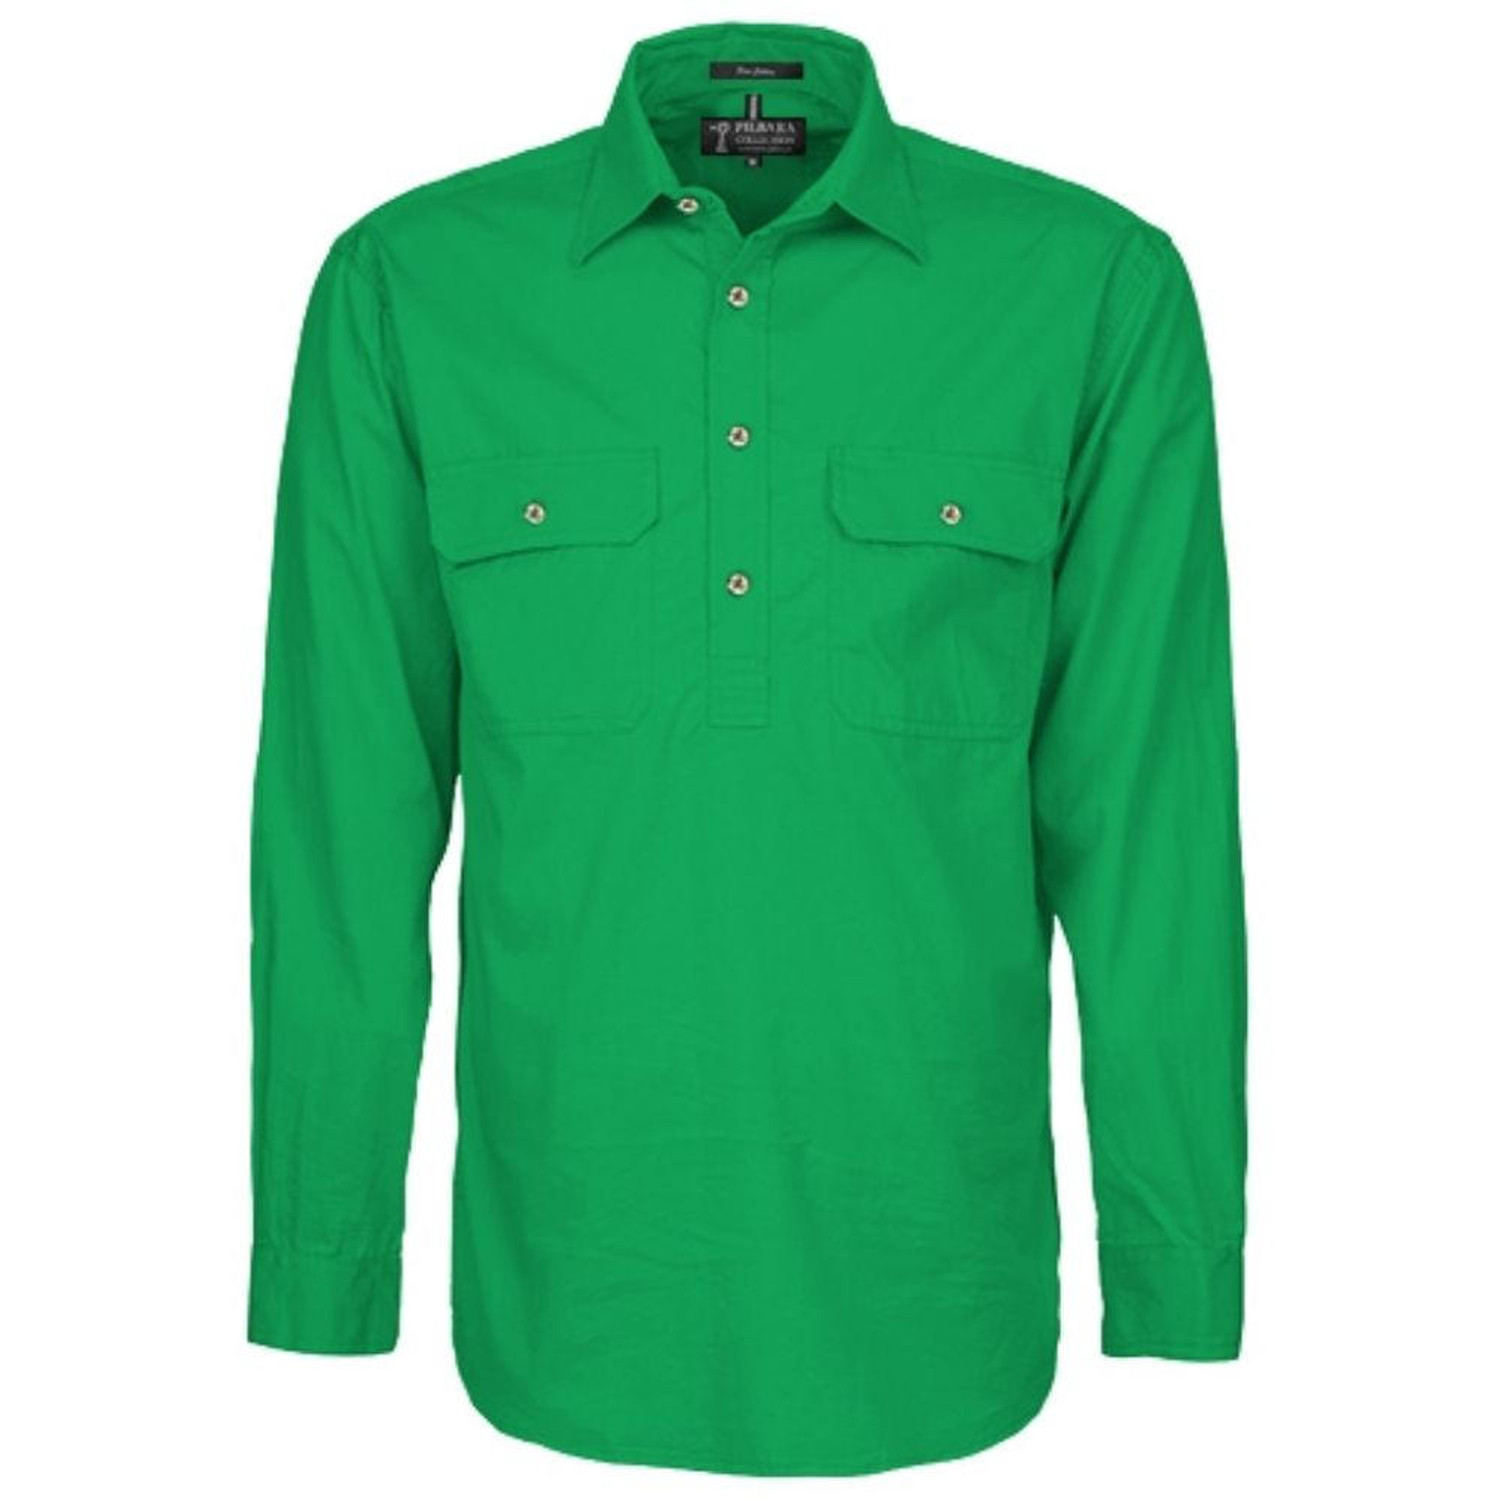  FREE EMBROIDERY - Men's Kelly Green CLOSED FRONT Shirt (buy 20+) 